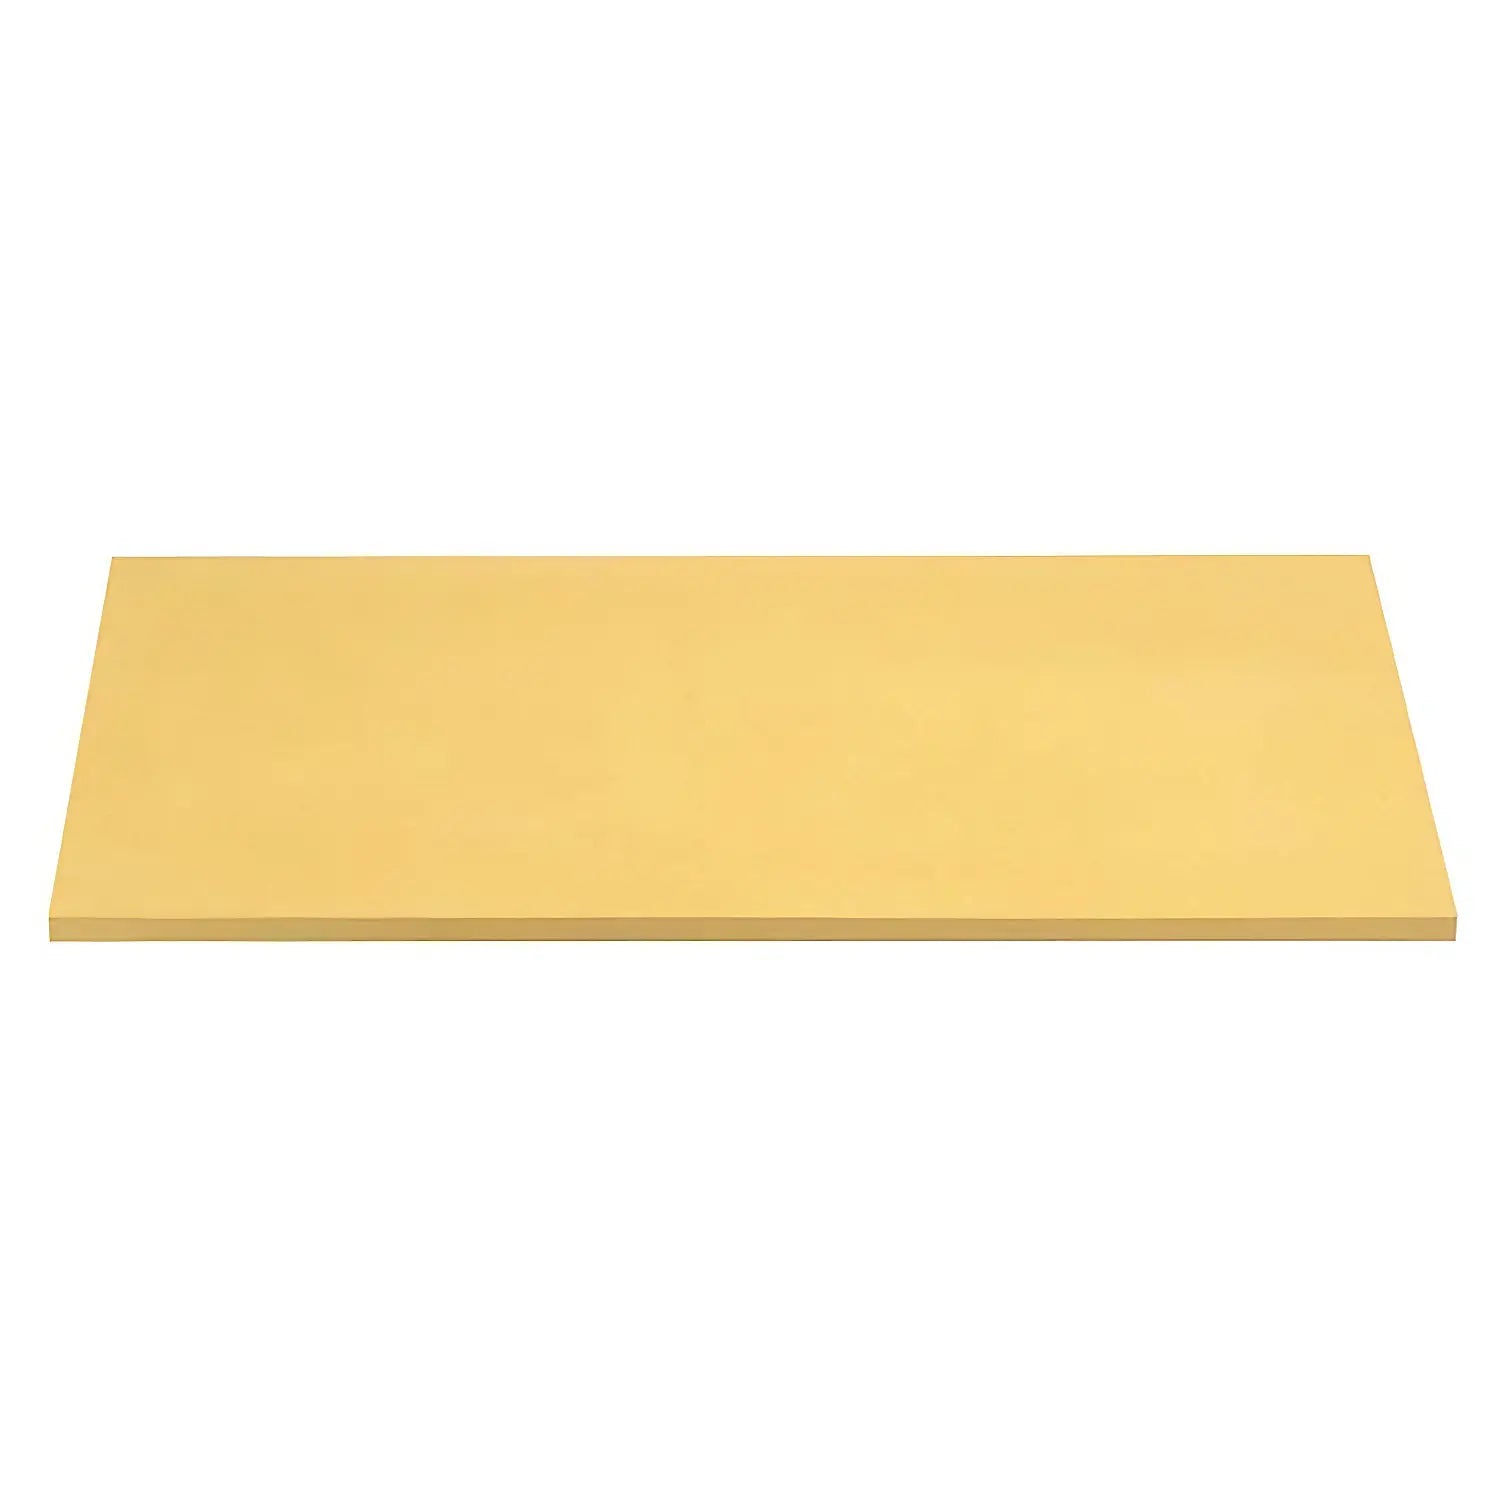 Asahi Rubber Cutting Board Household Use LL 420x250x13mm From Japan A92671  for sale online